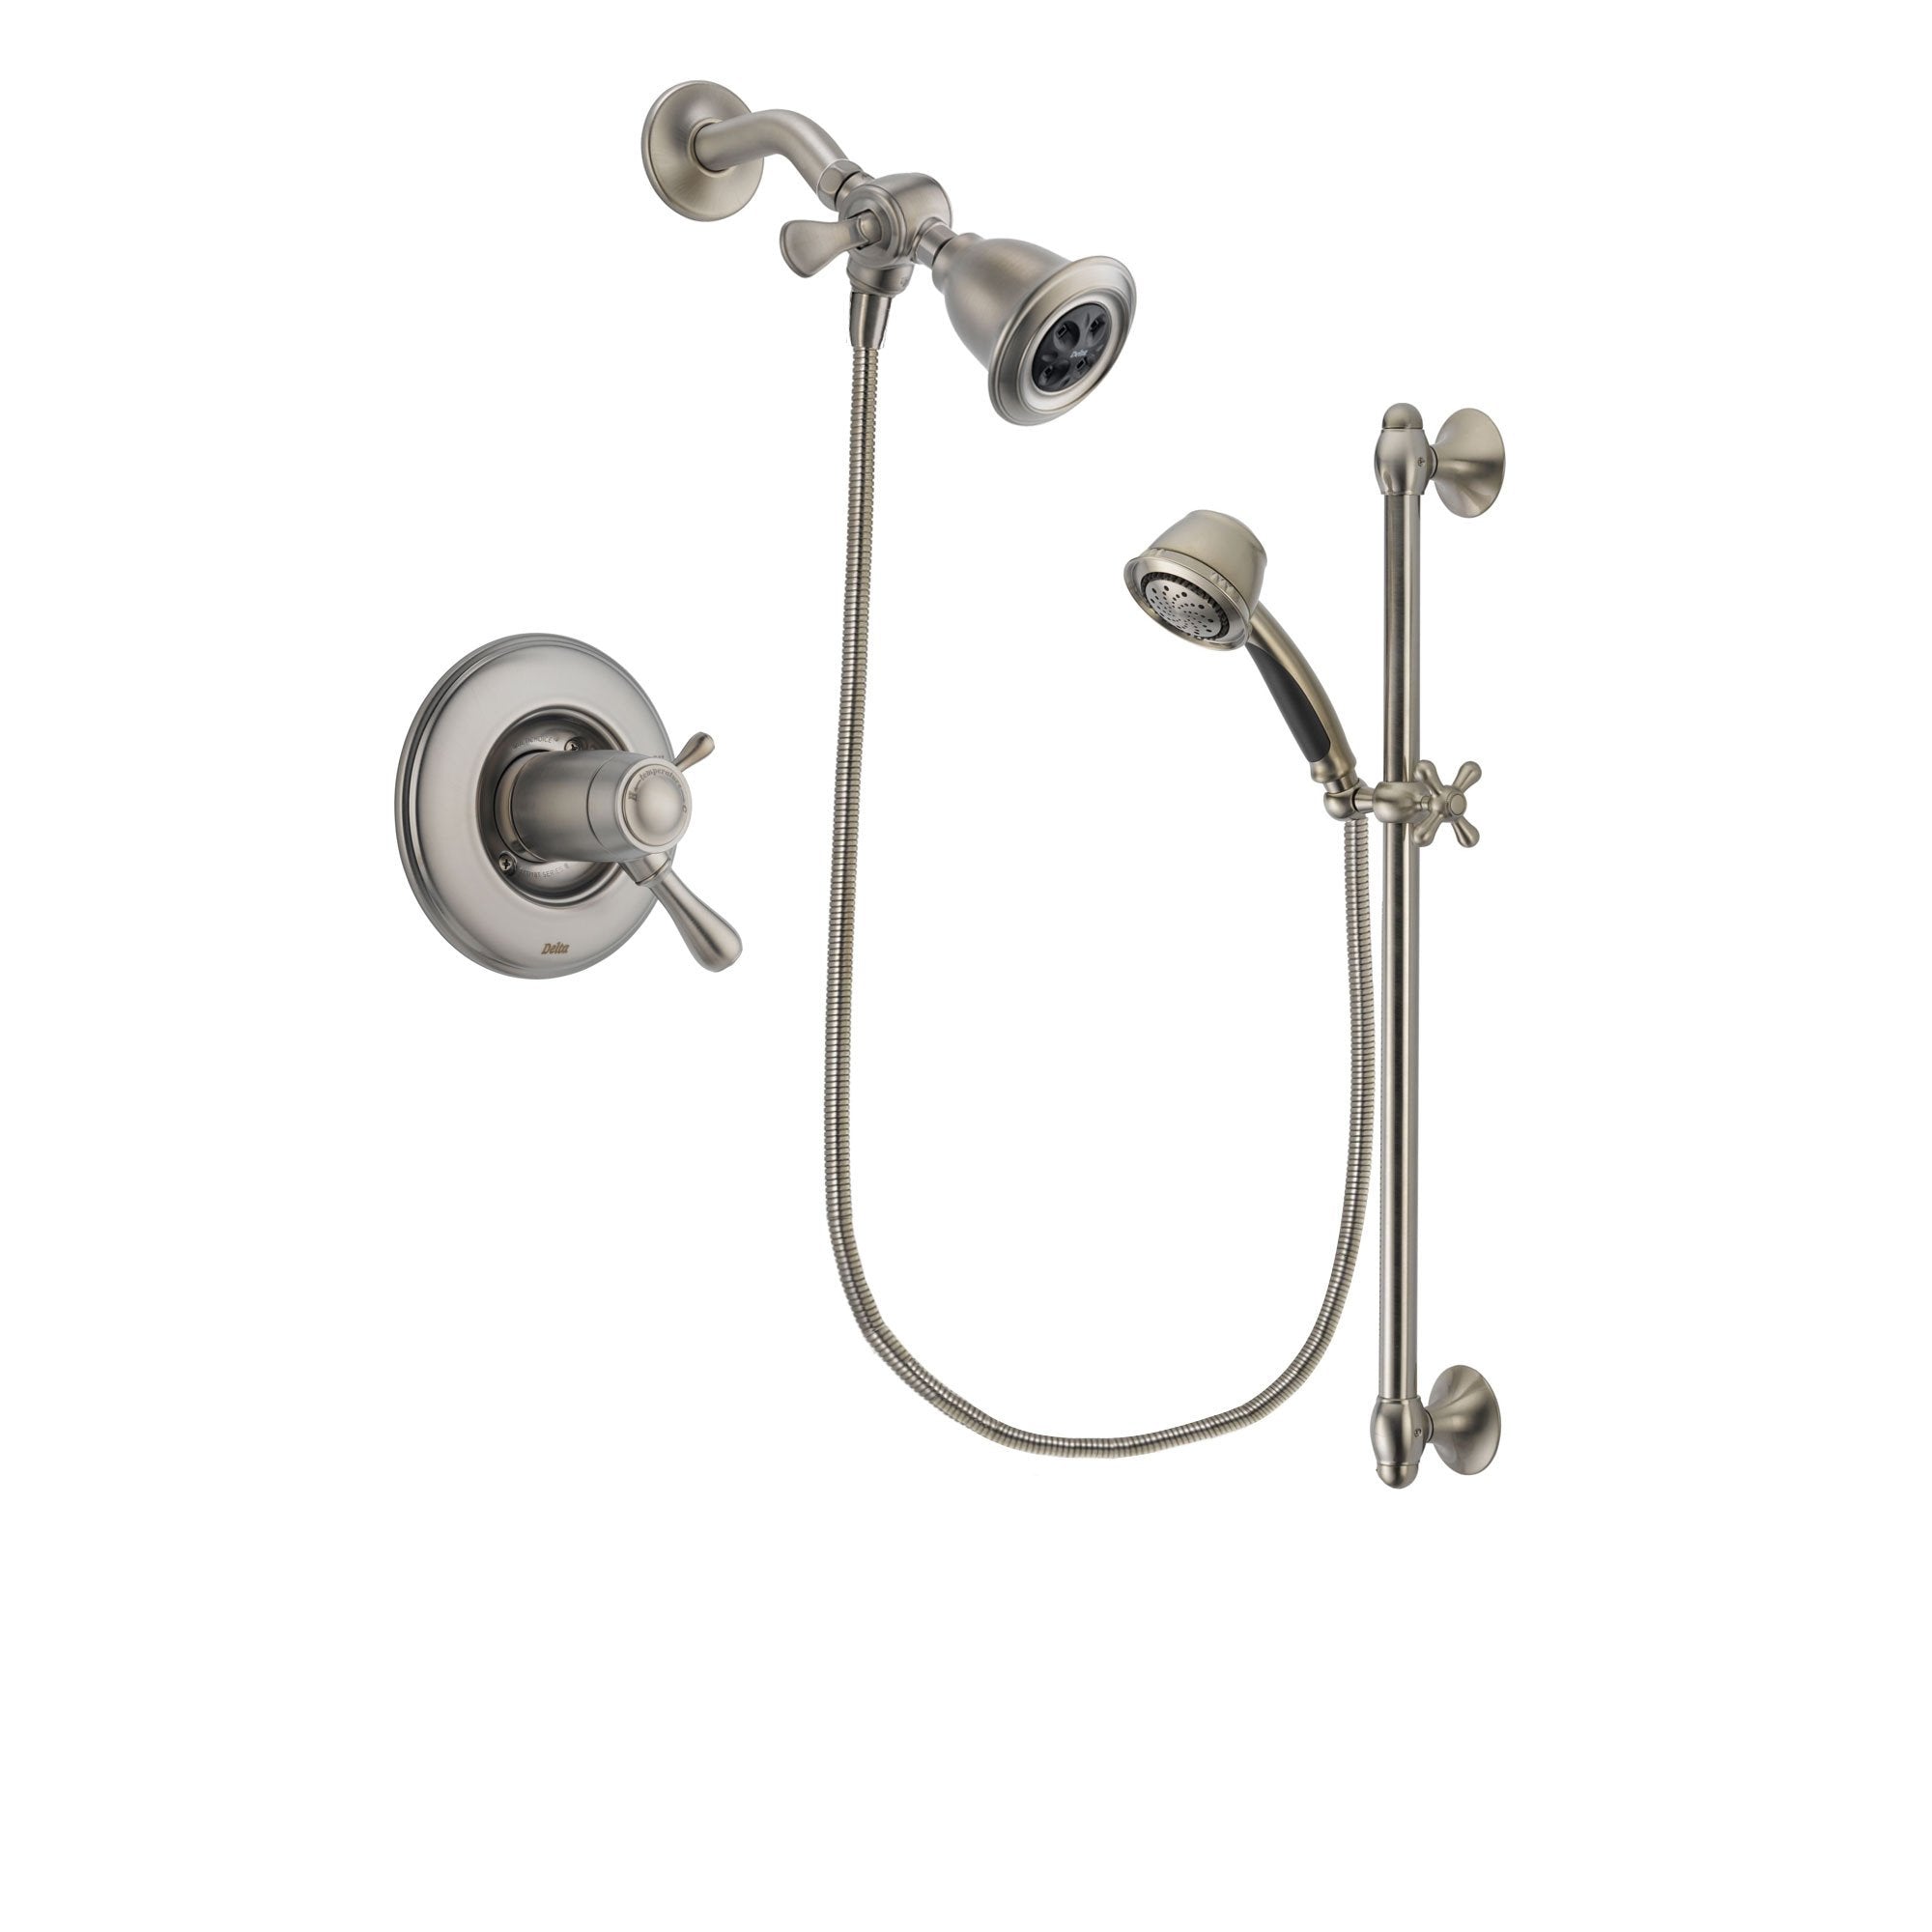 Delta Leland Stainless Steel Finish Thermostatic Shower Faucet System Package with Water Efficient Showerhead and 5-Spray Personal Handshower with Slide Bar Includes Rough-in Valve DSP1280V